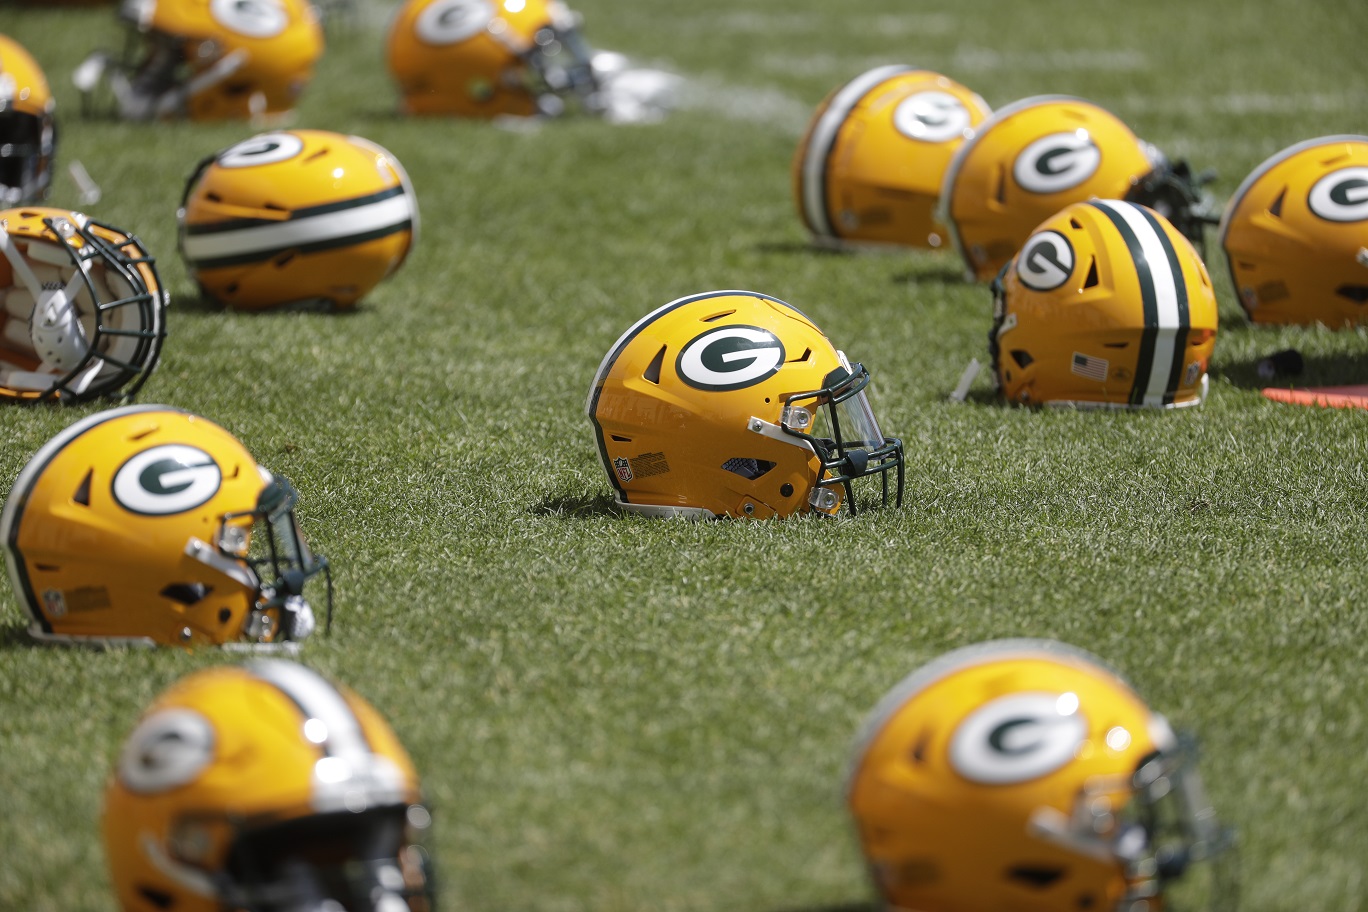 Packers prep for joint practices, preseason game with Patriots